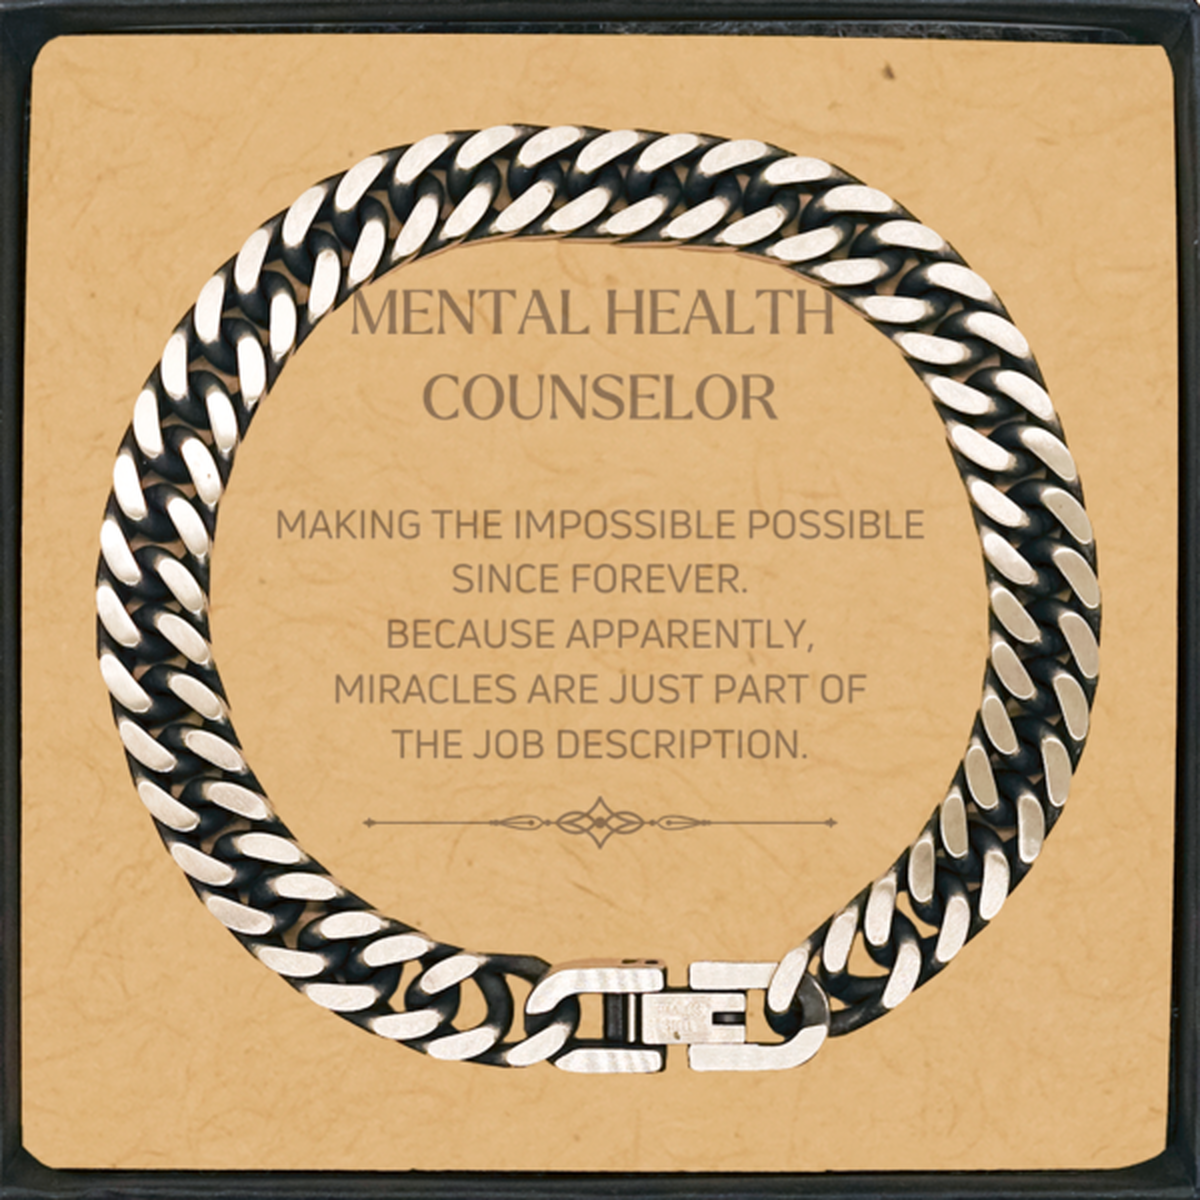 Funny Mental Health Counselor Gifts, Miracles are just part of the job description, Inspirational Birthday Cuban Link Chain Bracelet For Mental Health Counselor, Men, Women, Coworkers, Friends, Boss